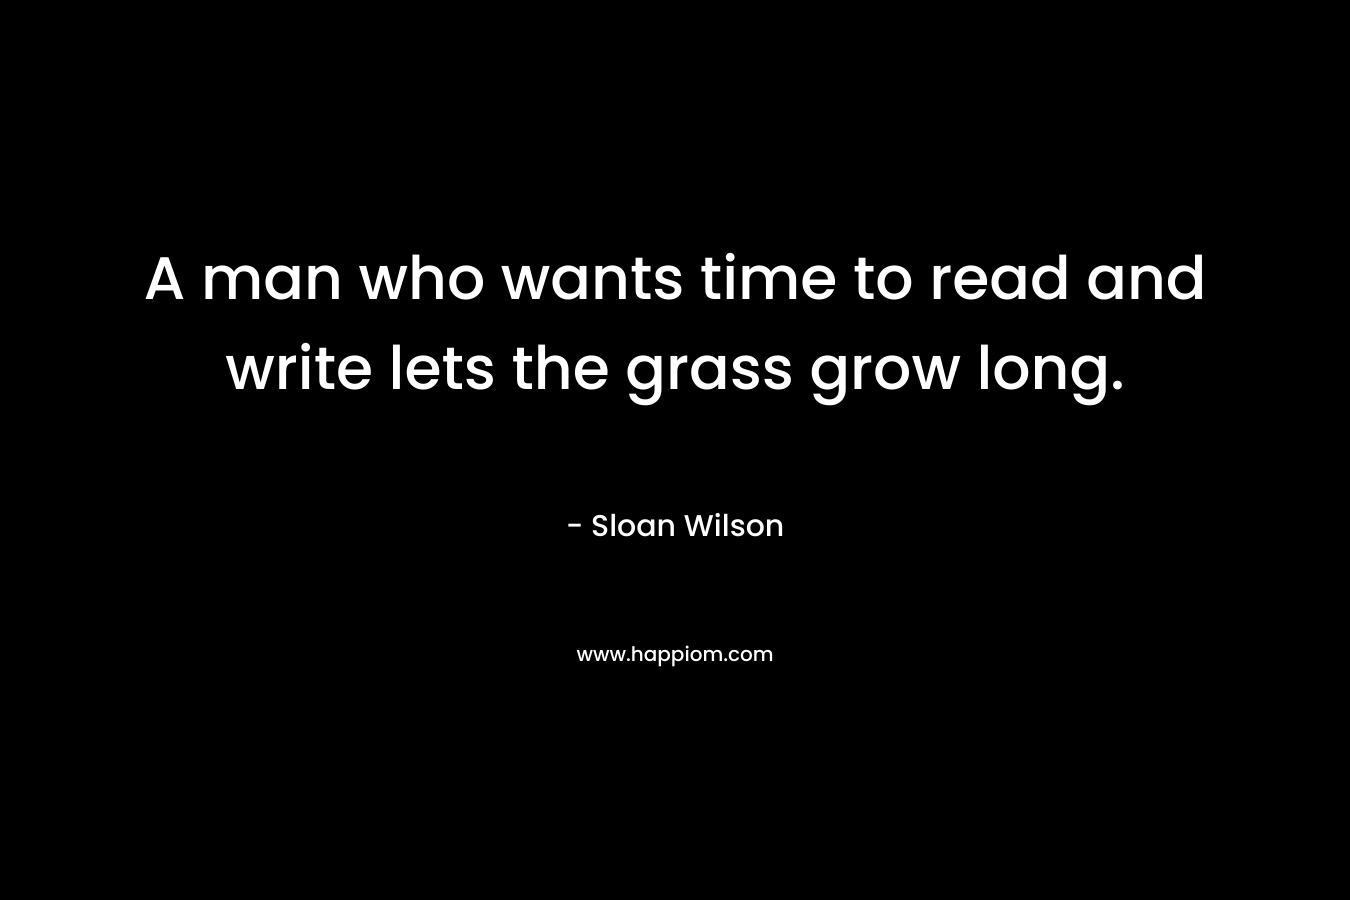 A man who wants time to read and write lets the grass grow long.